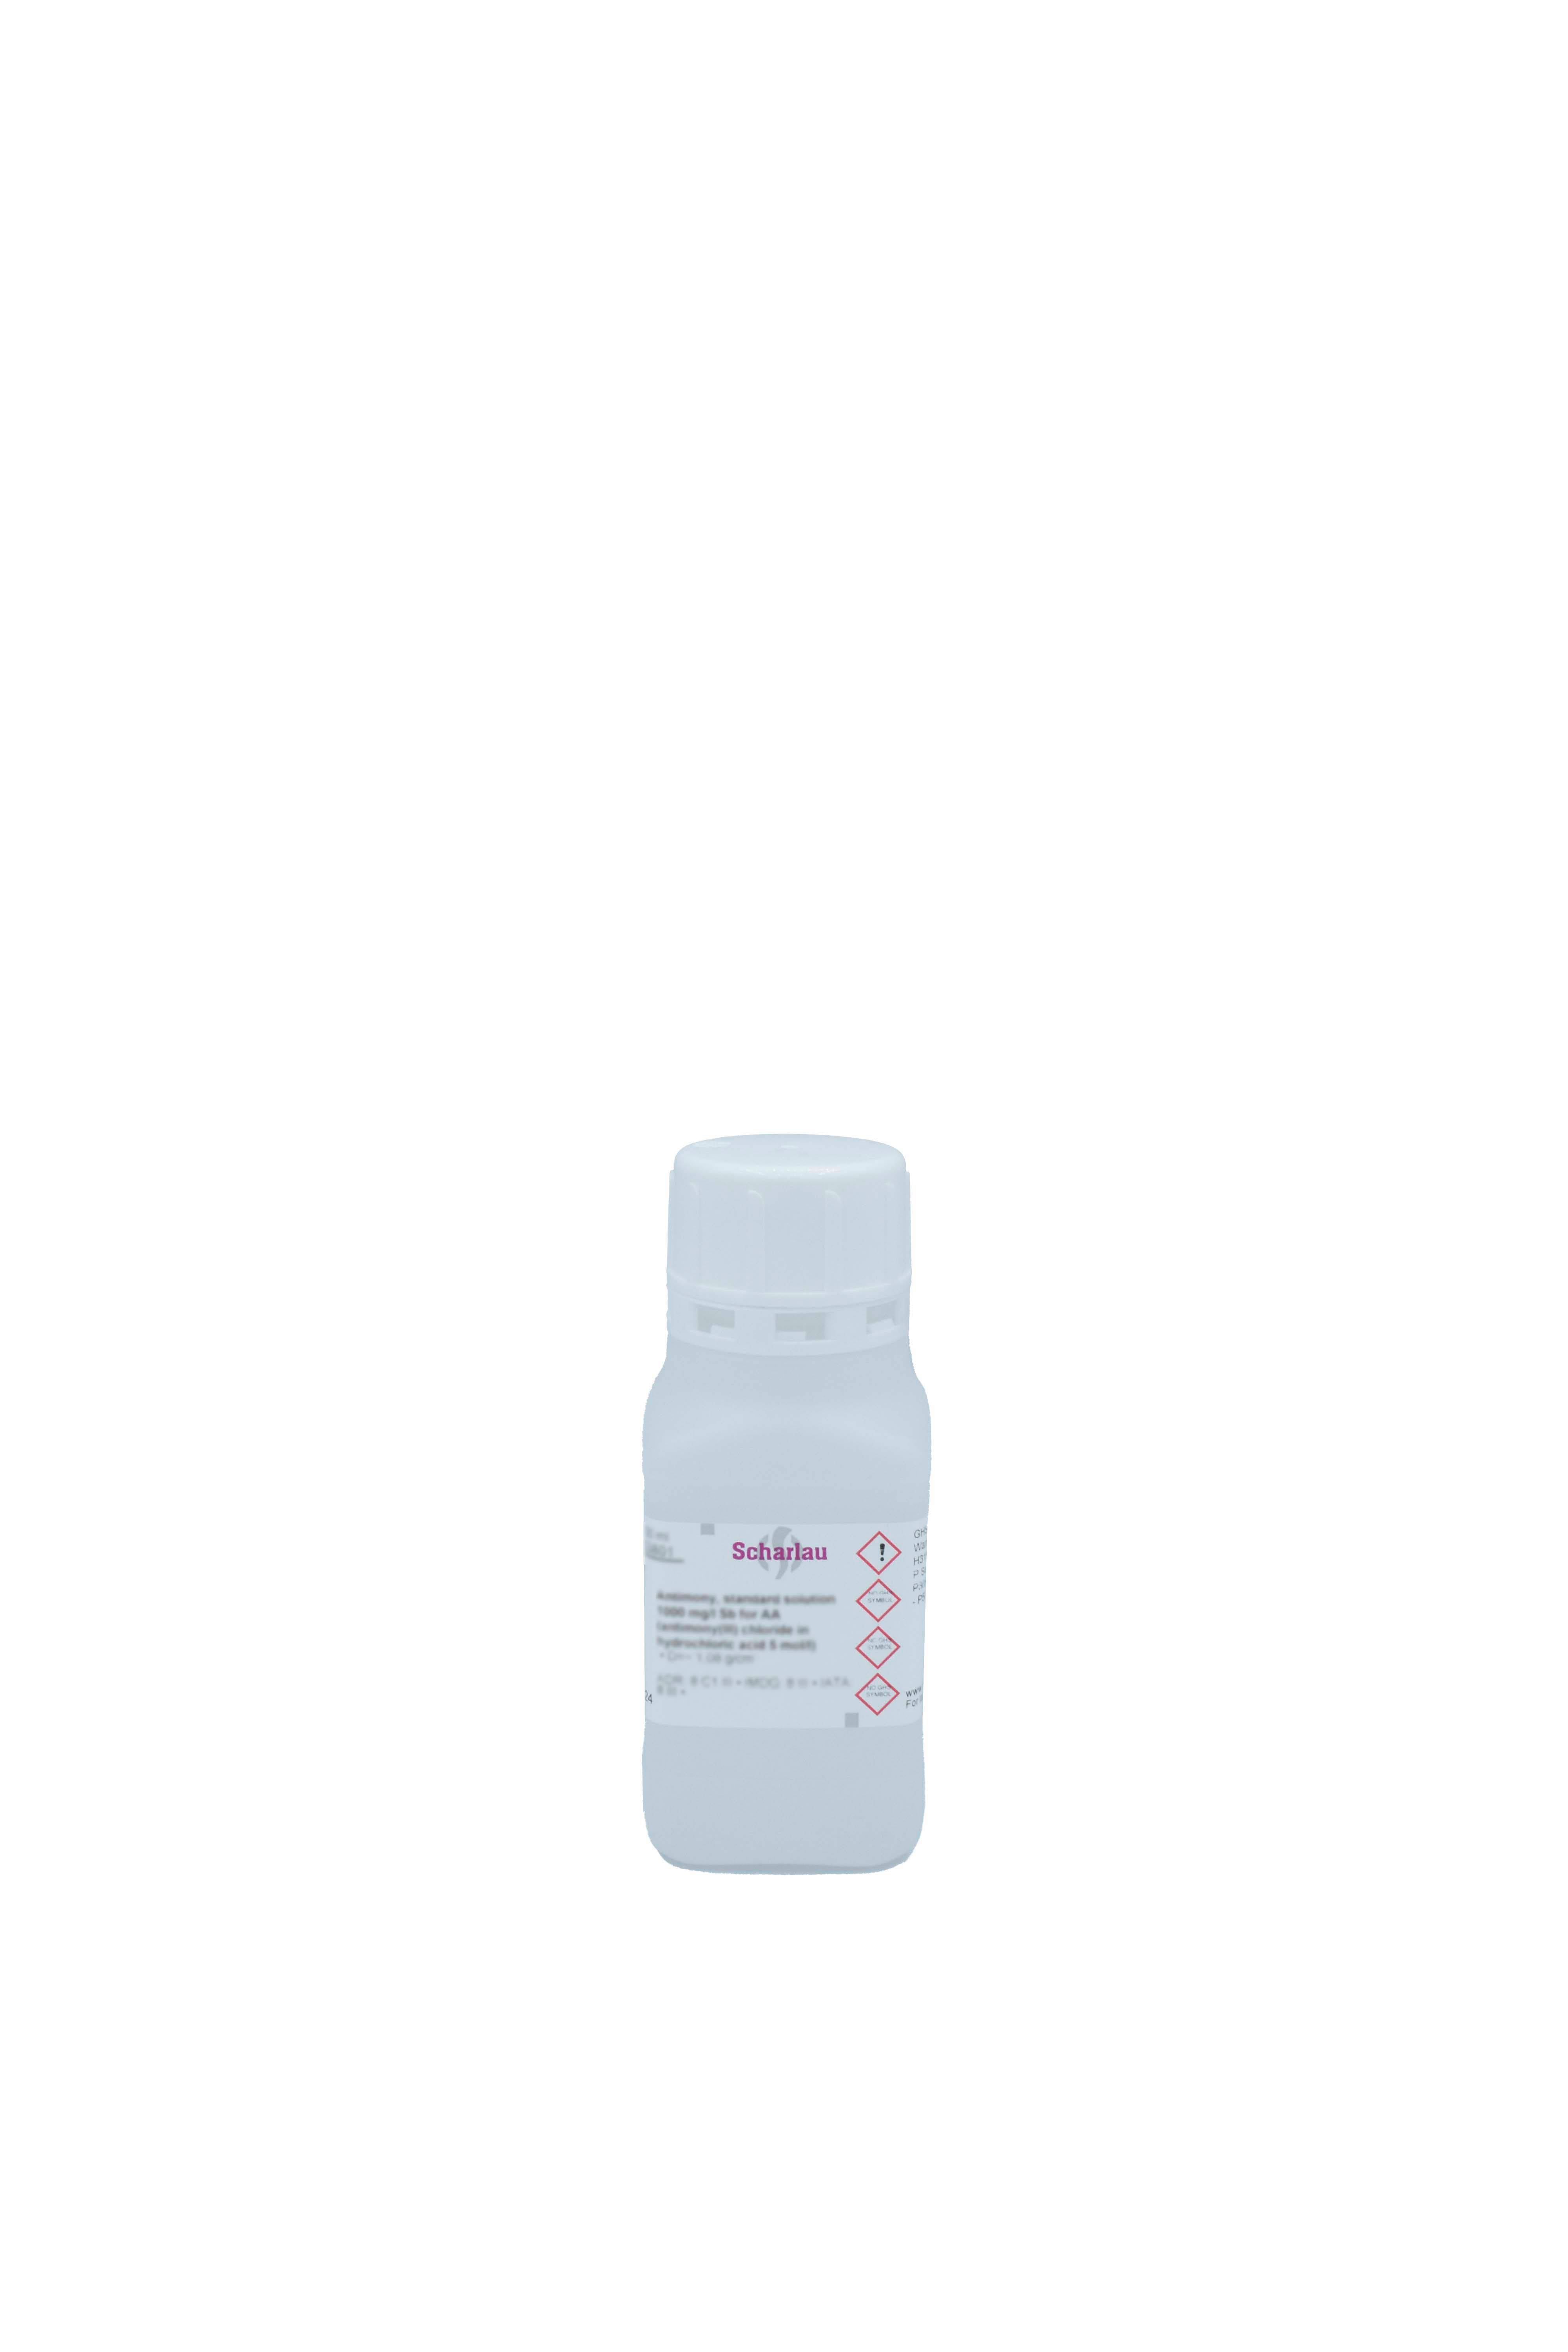 Tin, standard solution 1000 mg/l Sn for AAsS (tin(IV) chloride in HCl 5 mol/l) 